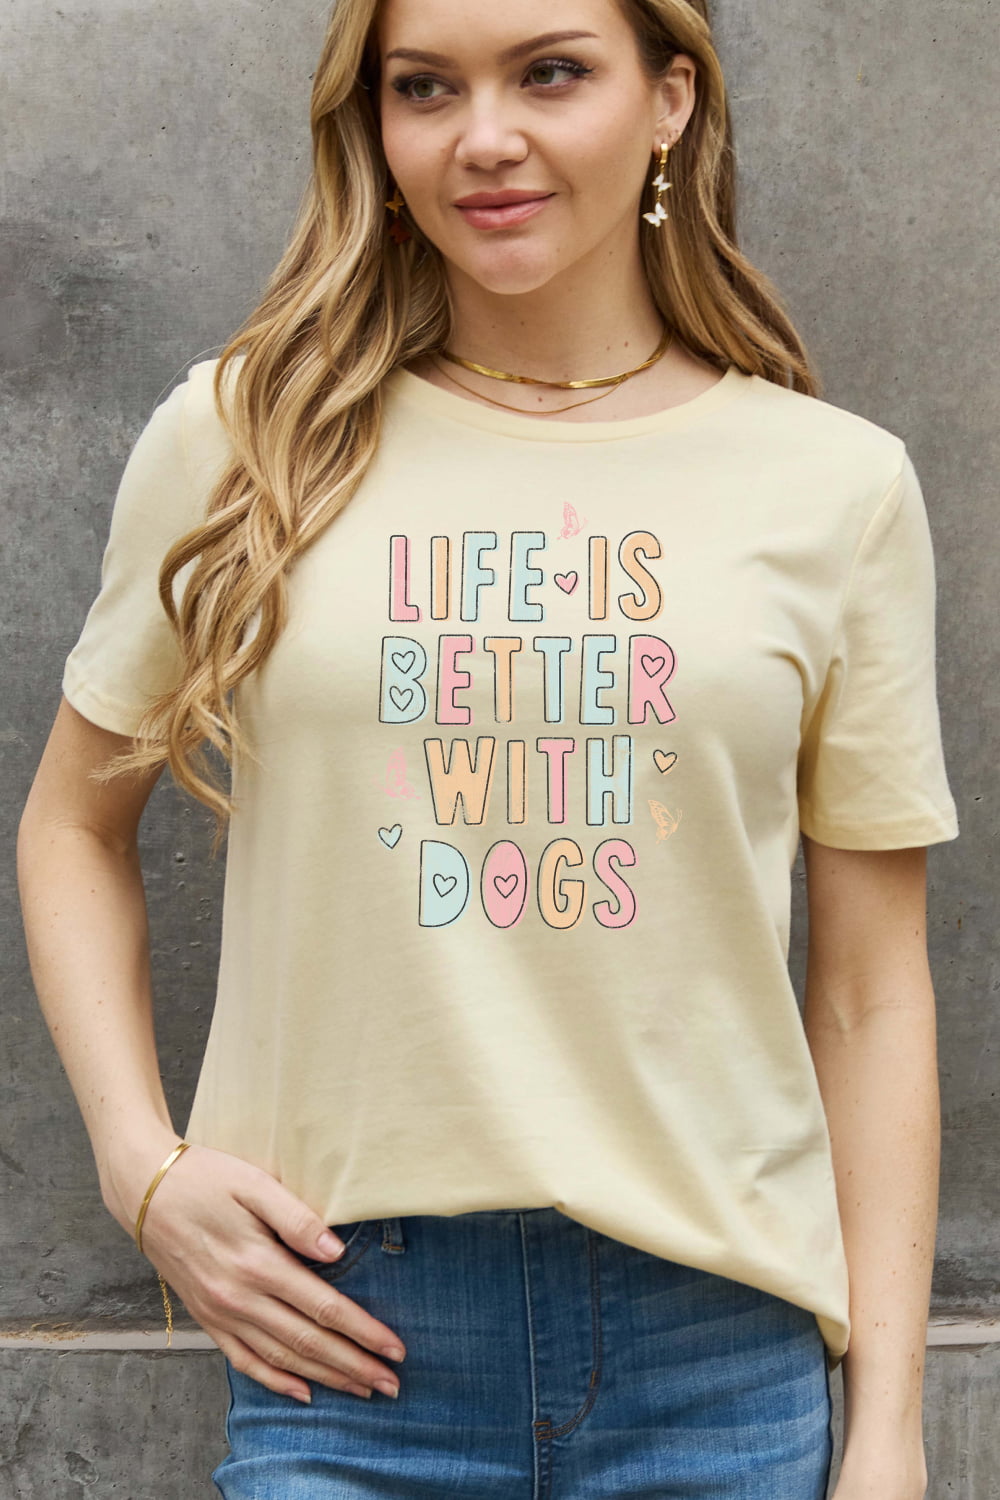 Simply Love Full Size LIFE IS BETTER WITH DOGS Graphic Cotton Tee